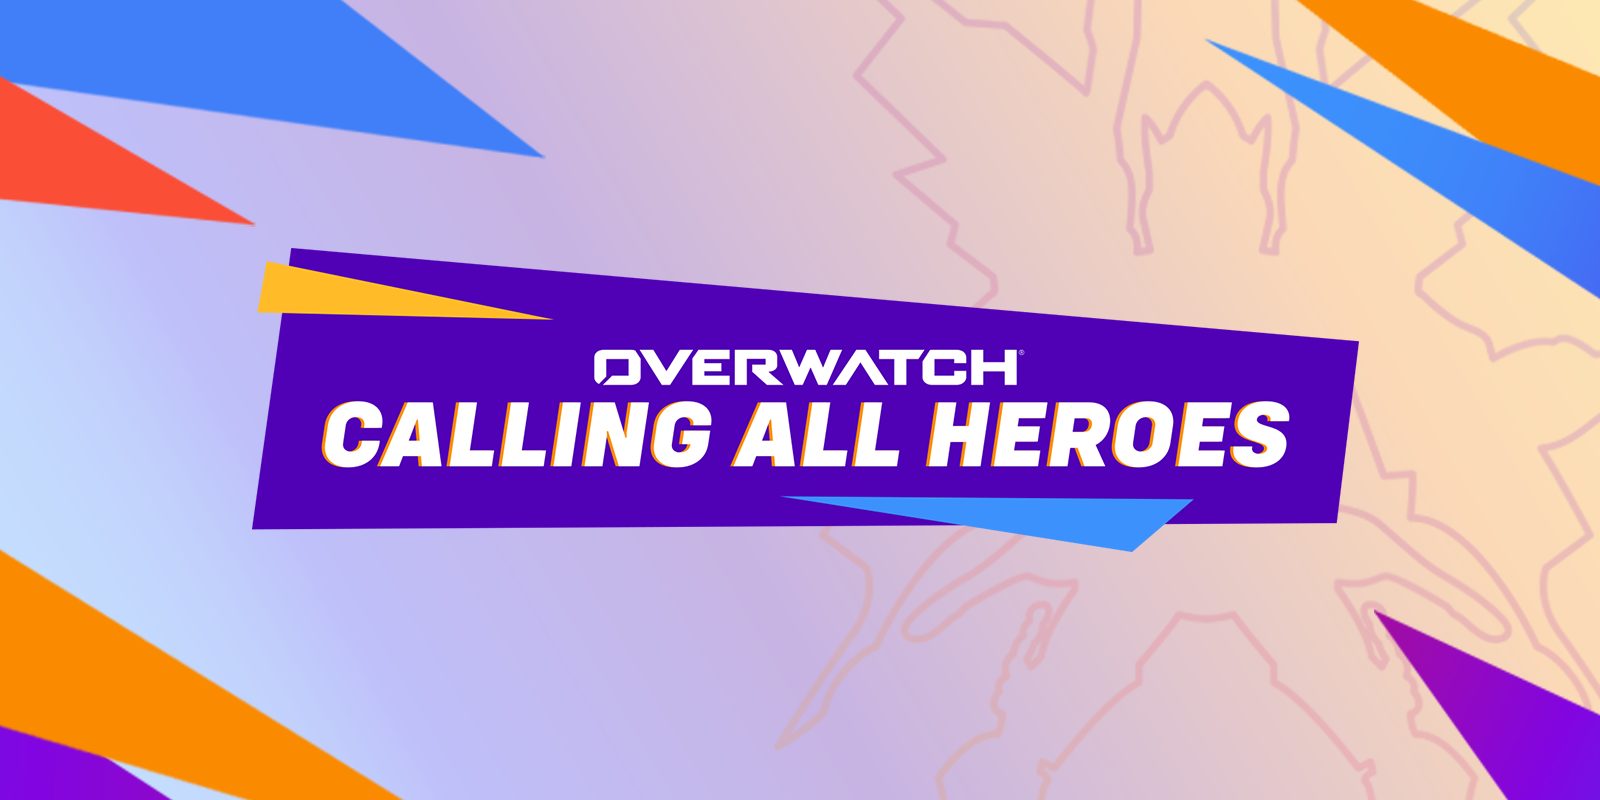 Calling All Heroes - Overwatch 2 tournament